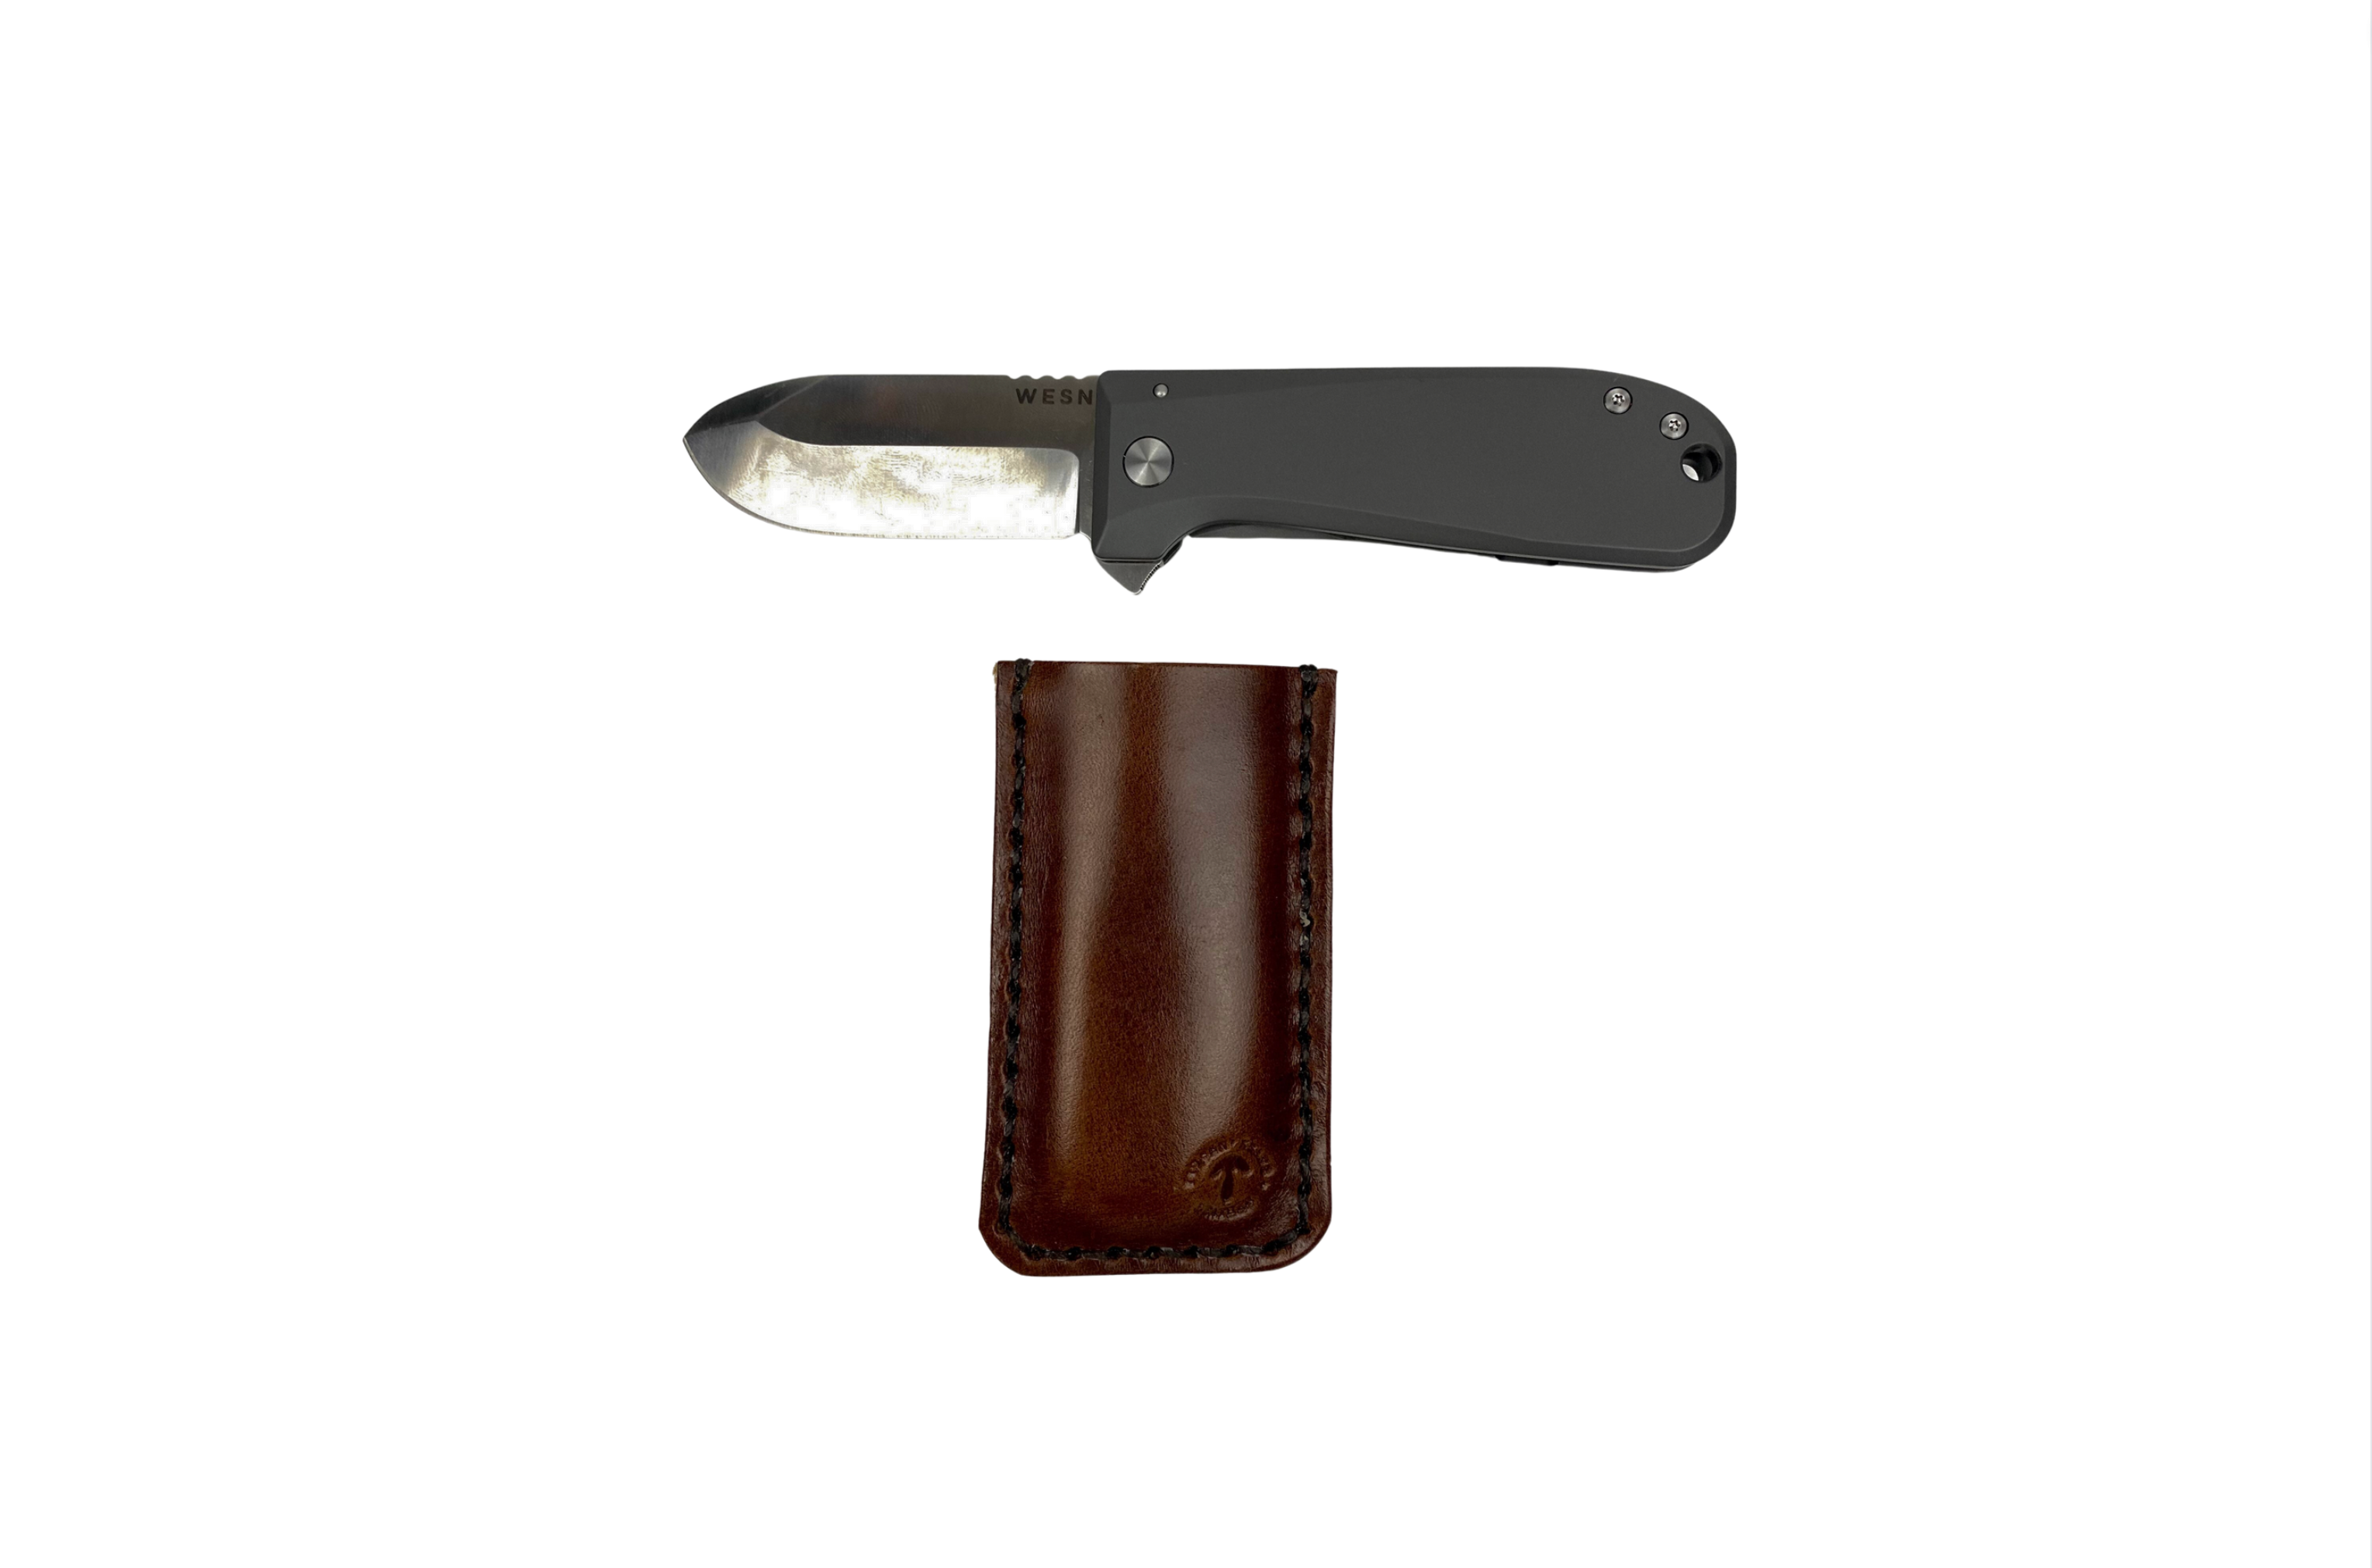 WESN The Allman Knife with Leather Sheath